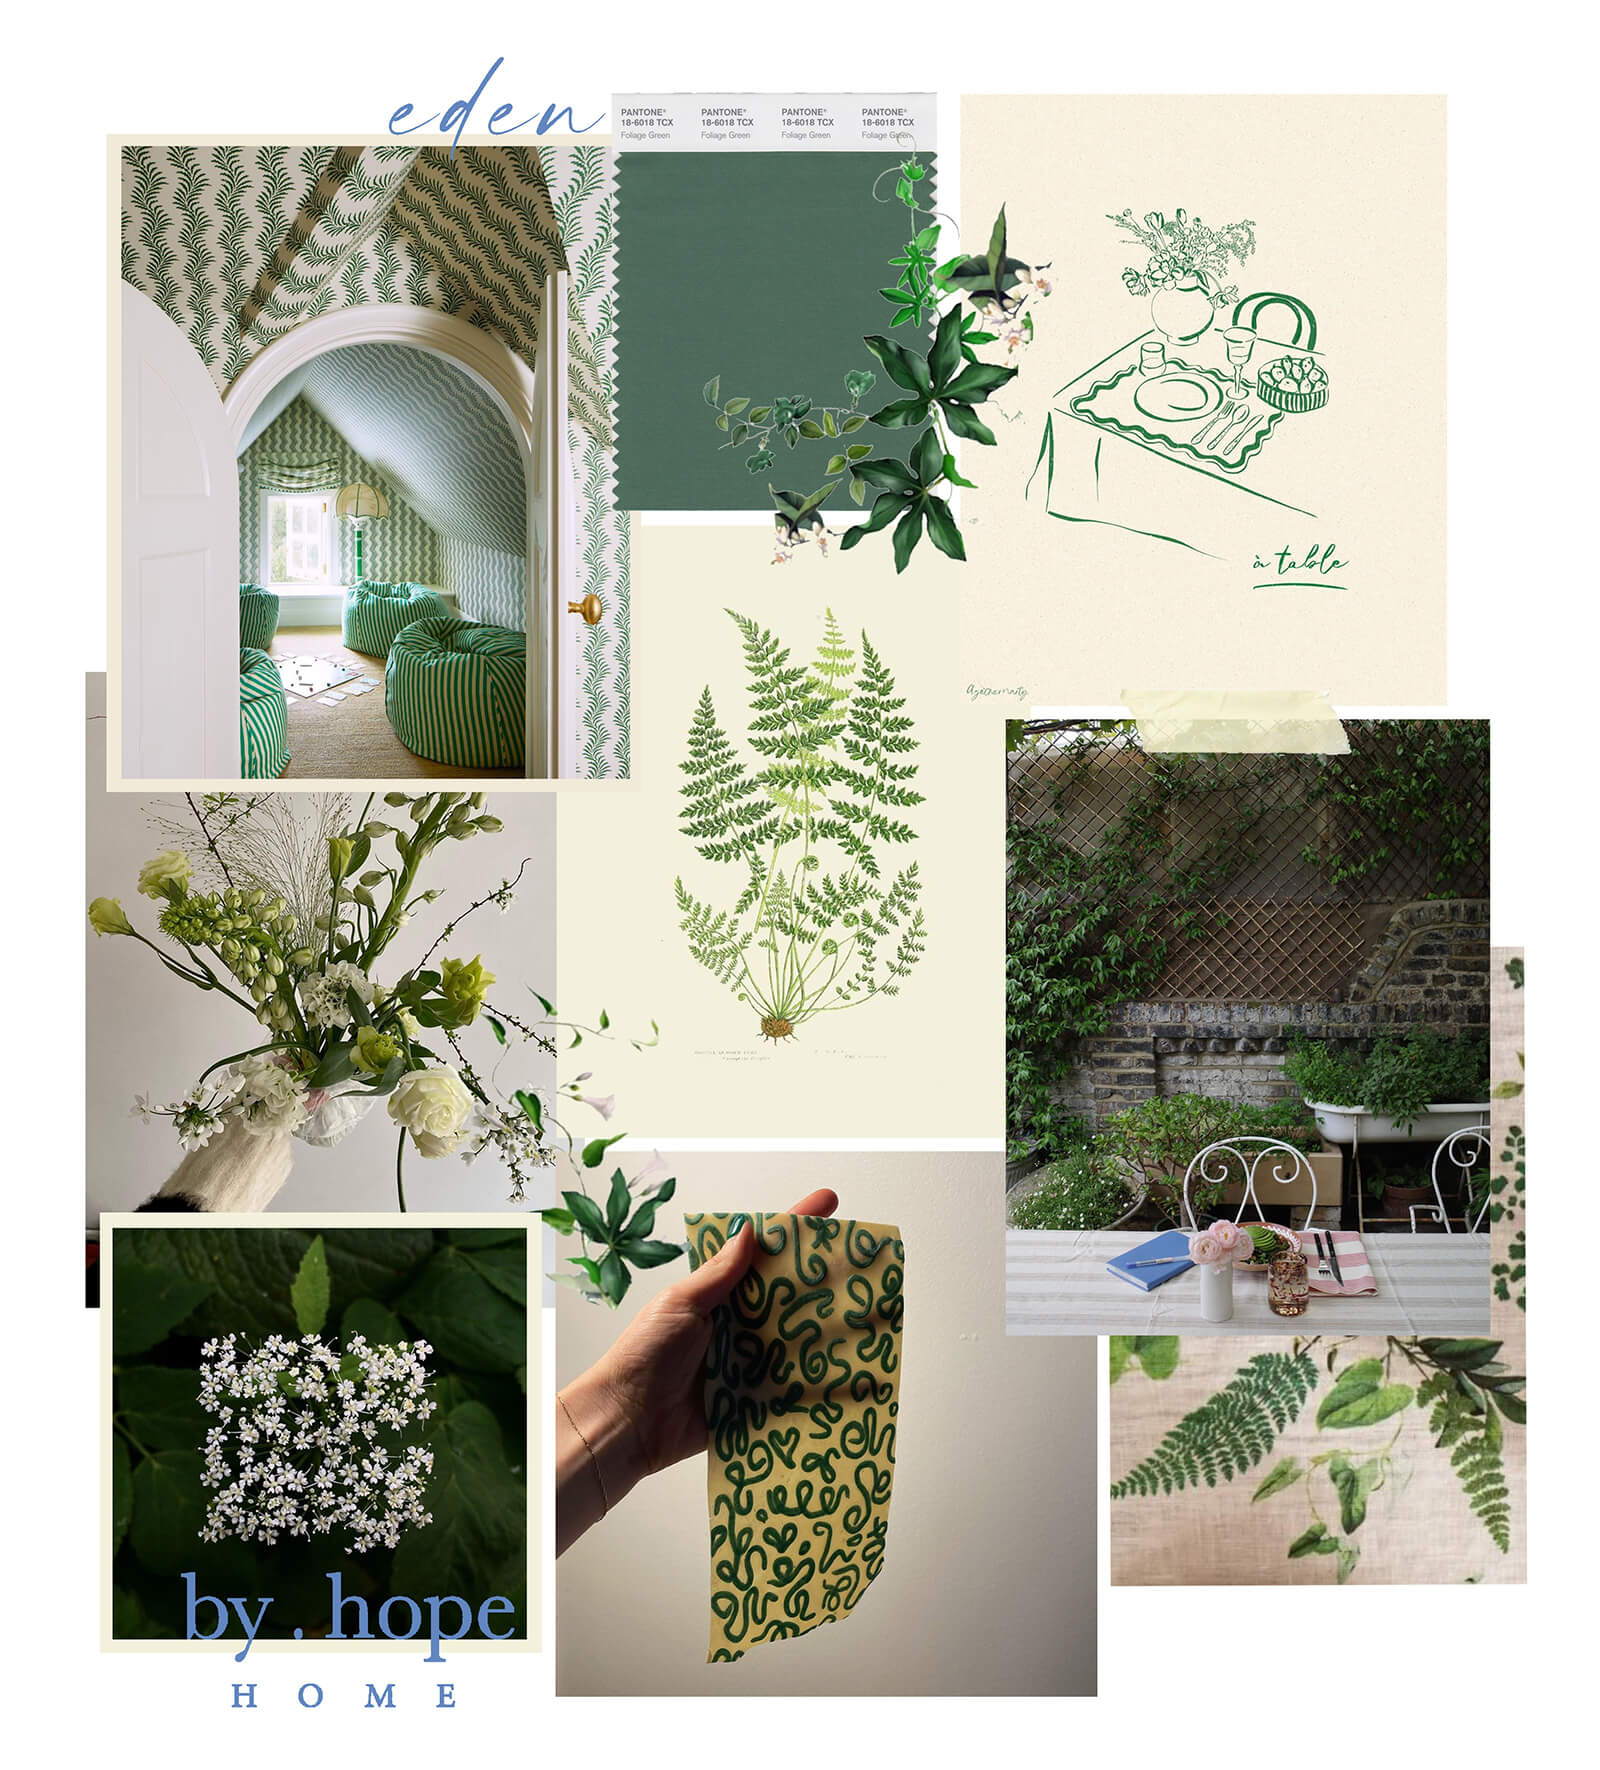 The Eden By Hope moodboard.